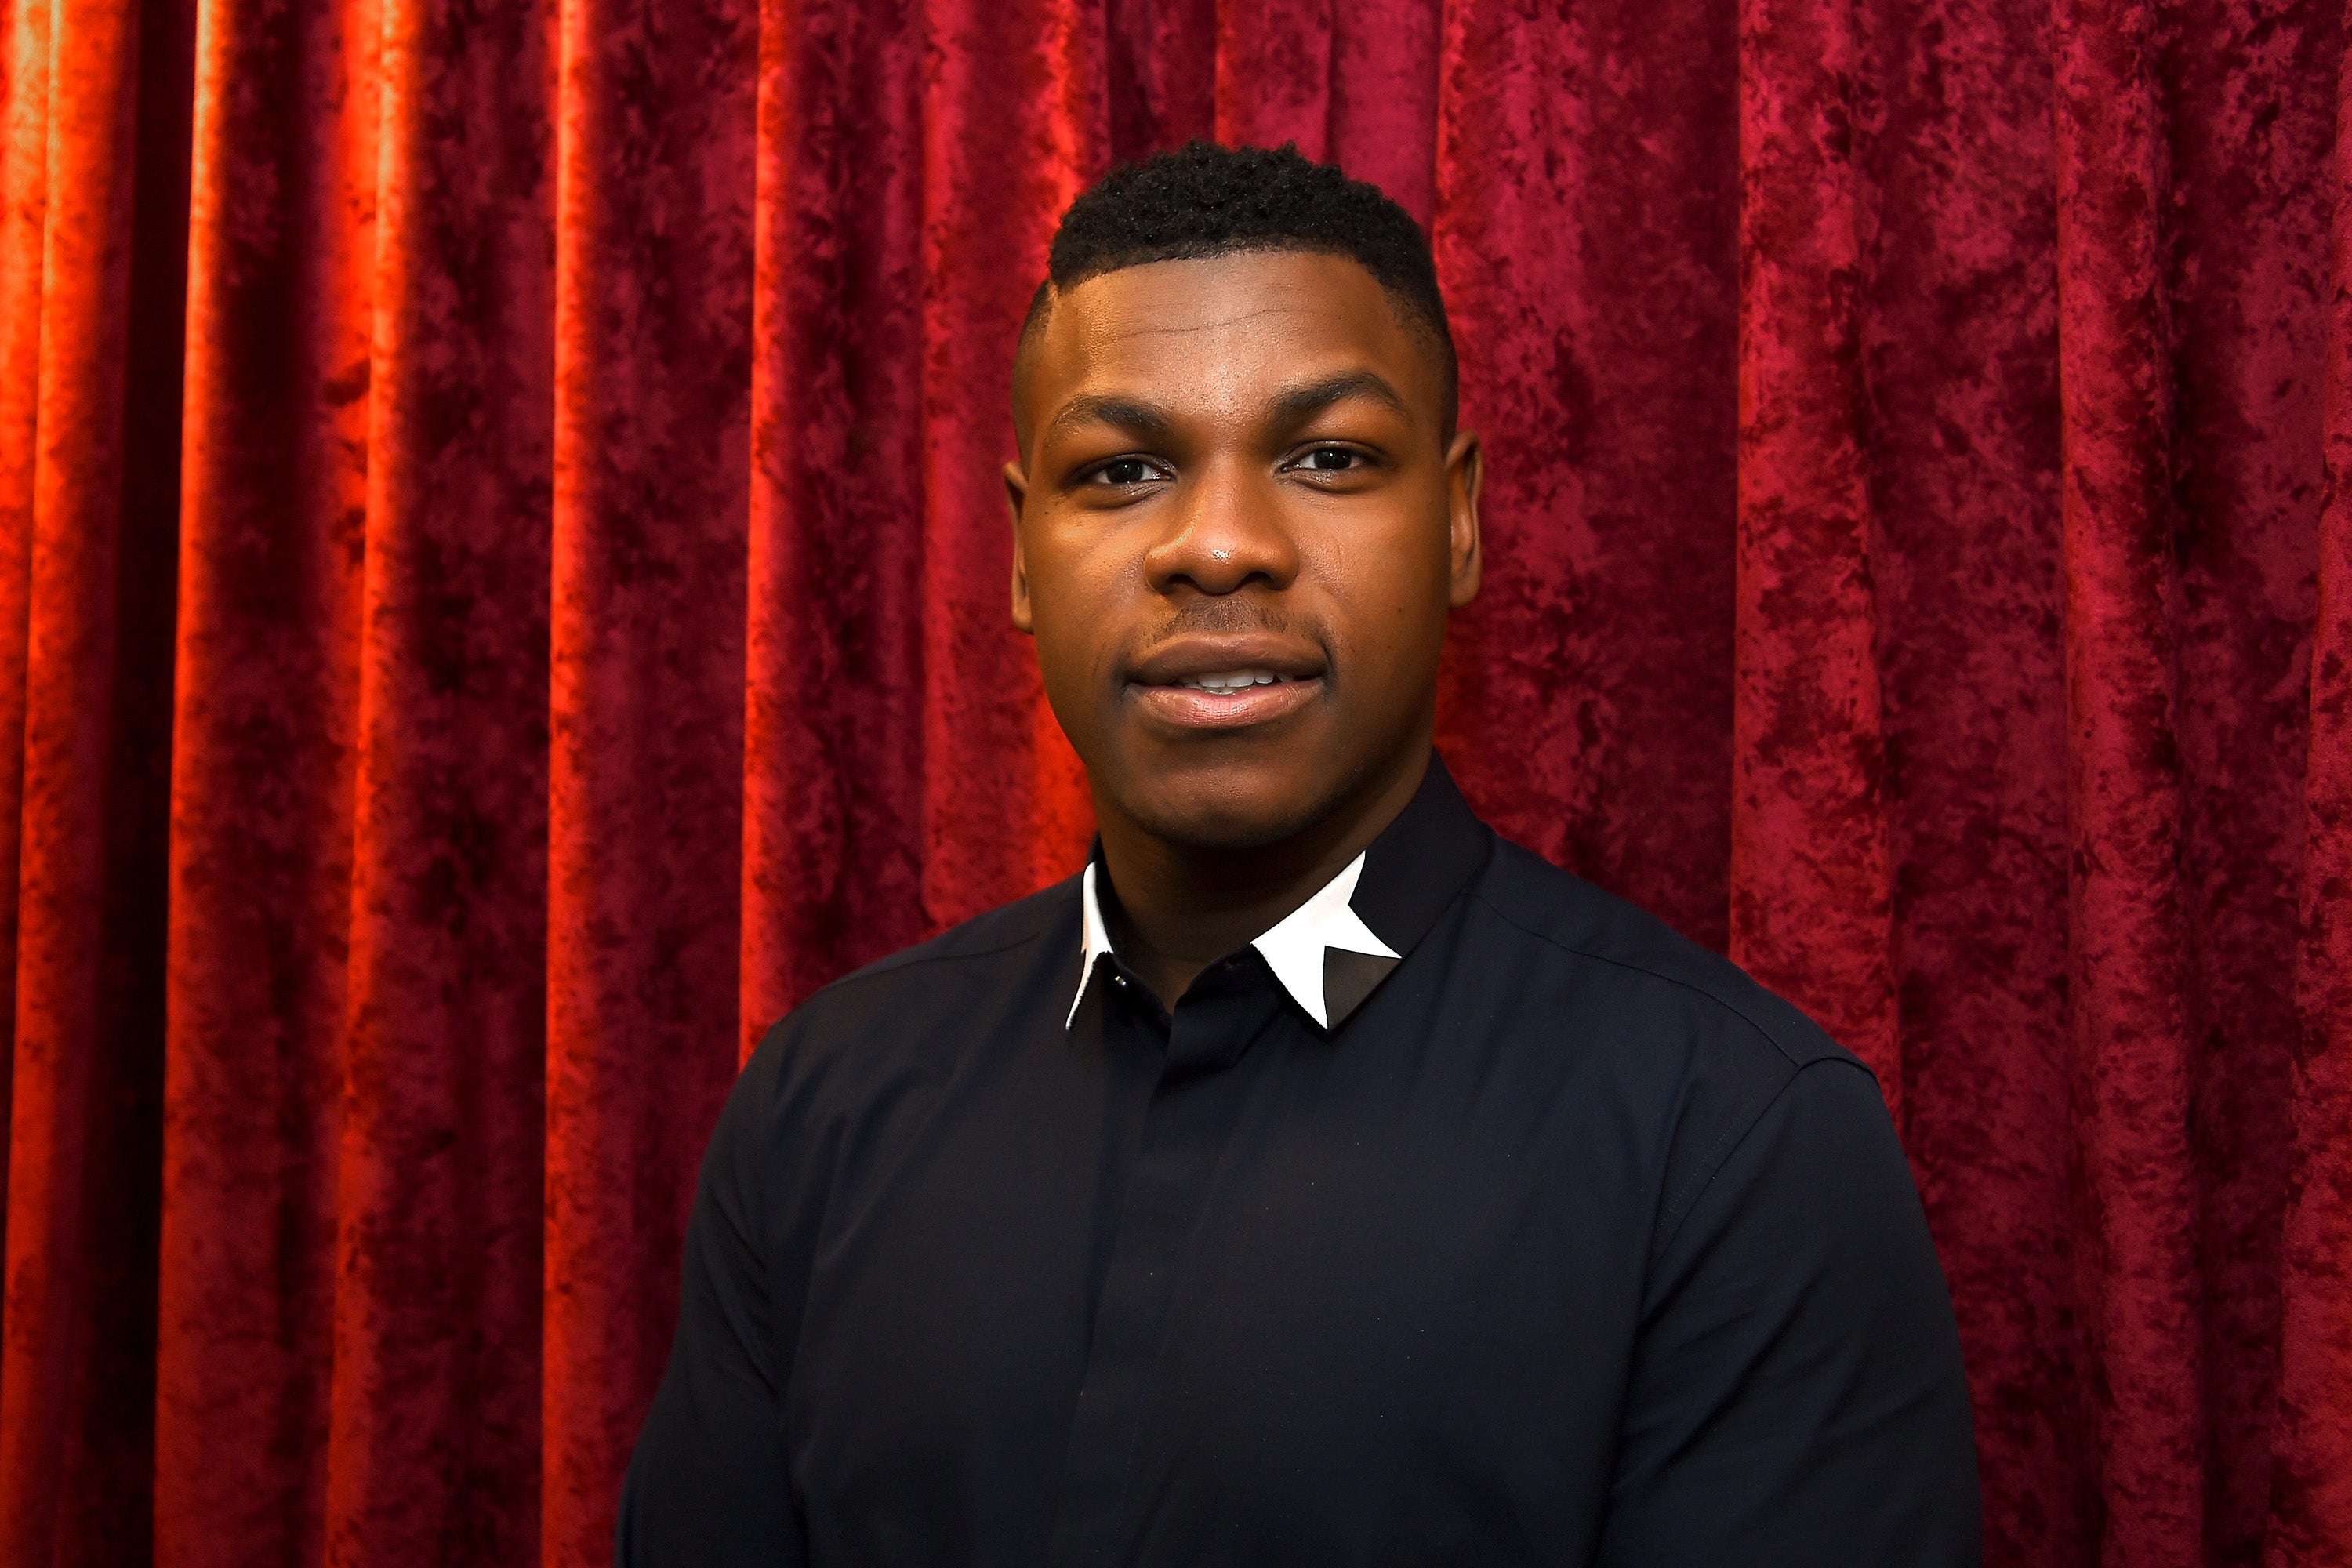 John Boyega Says 'Detroit' Ignited Passion To Fight Systemic Racism
